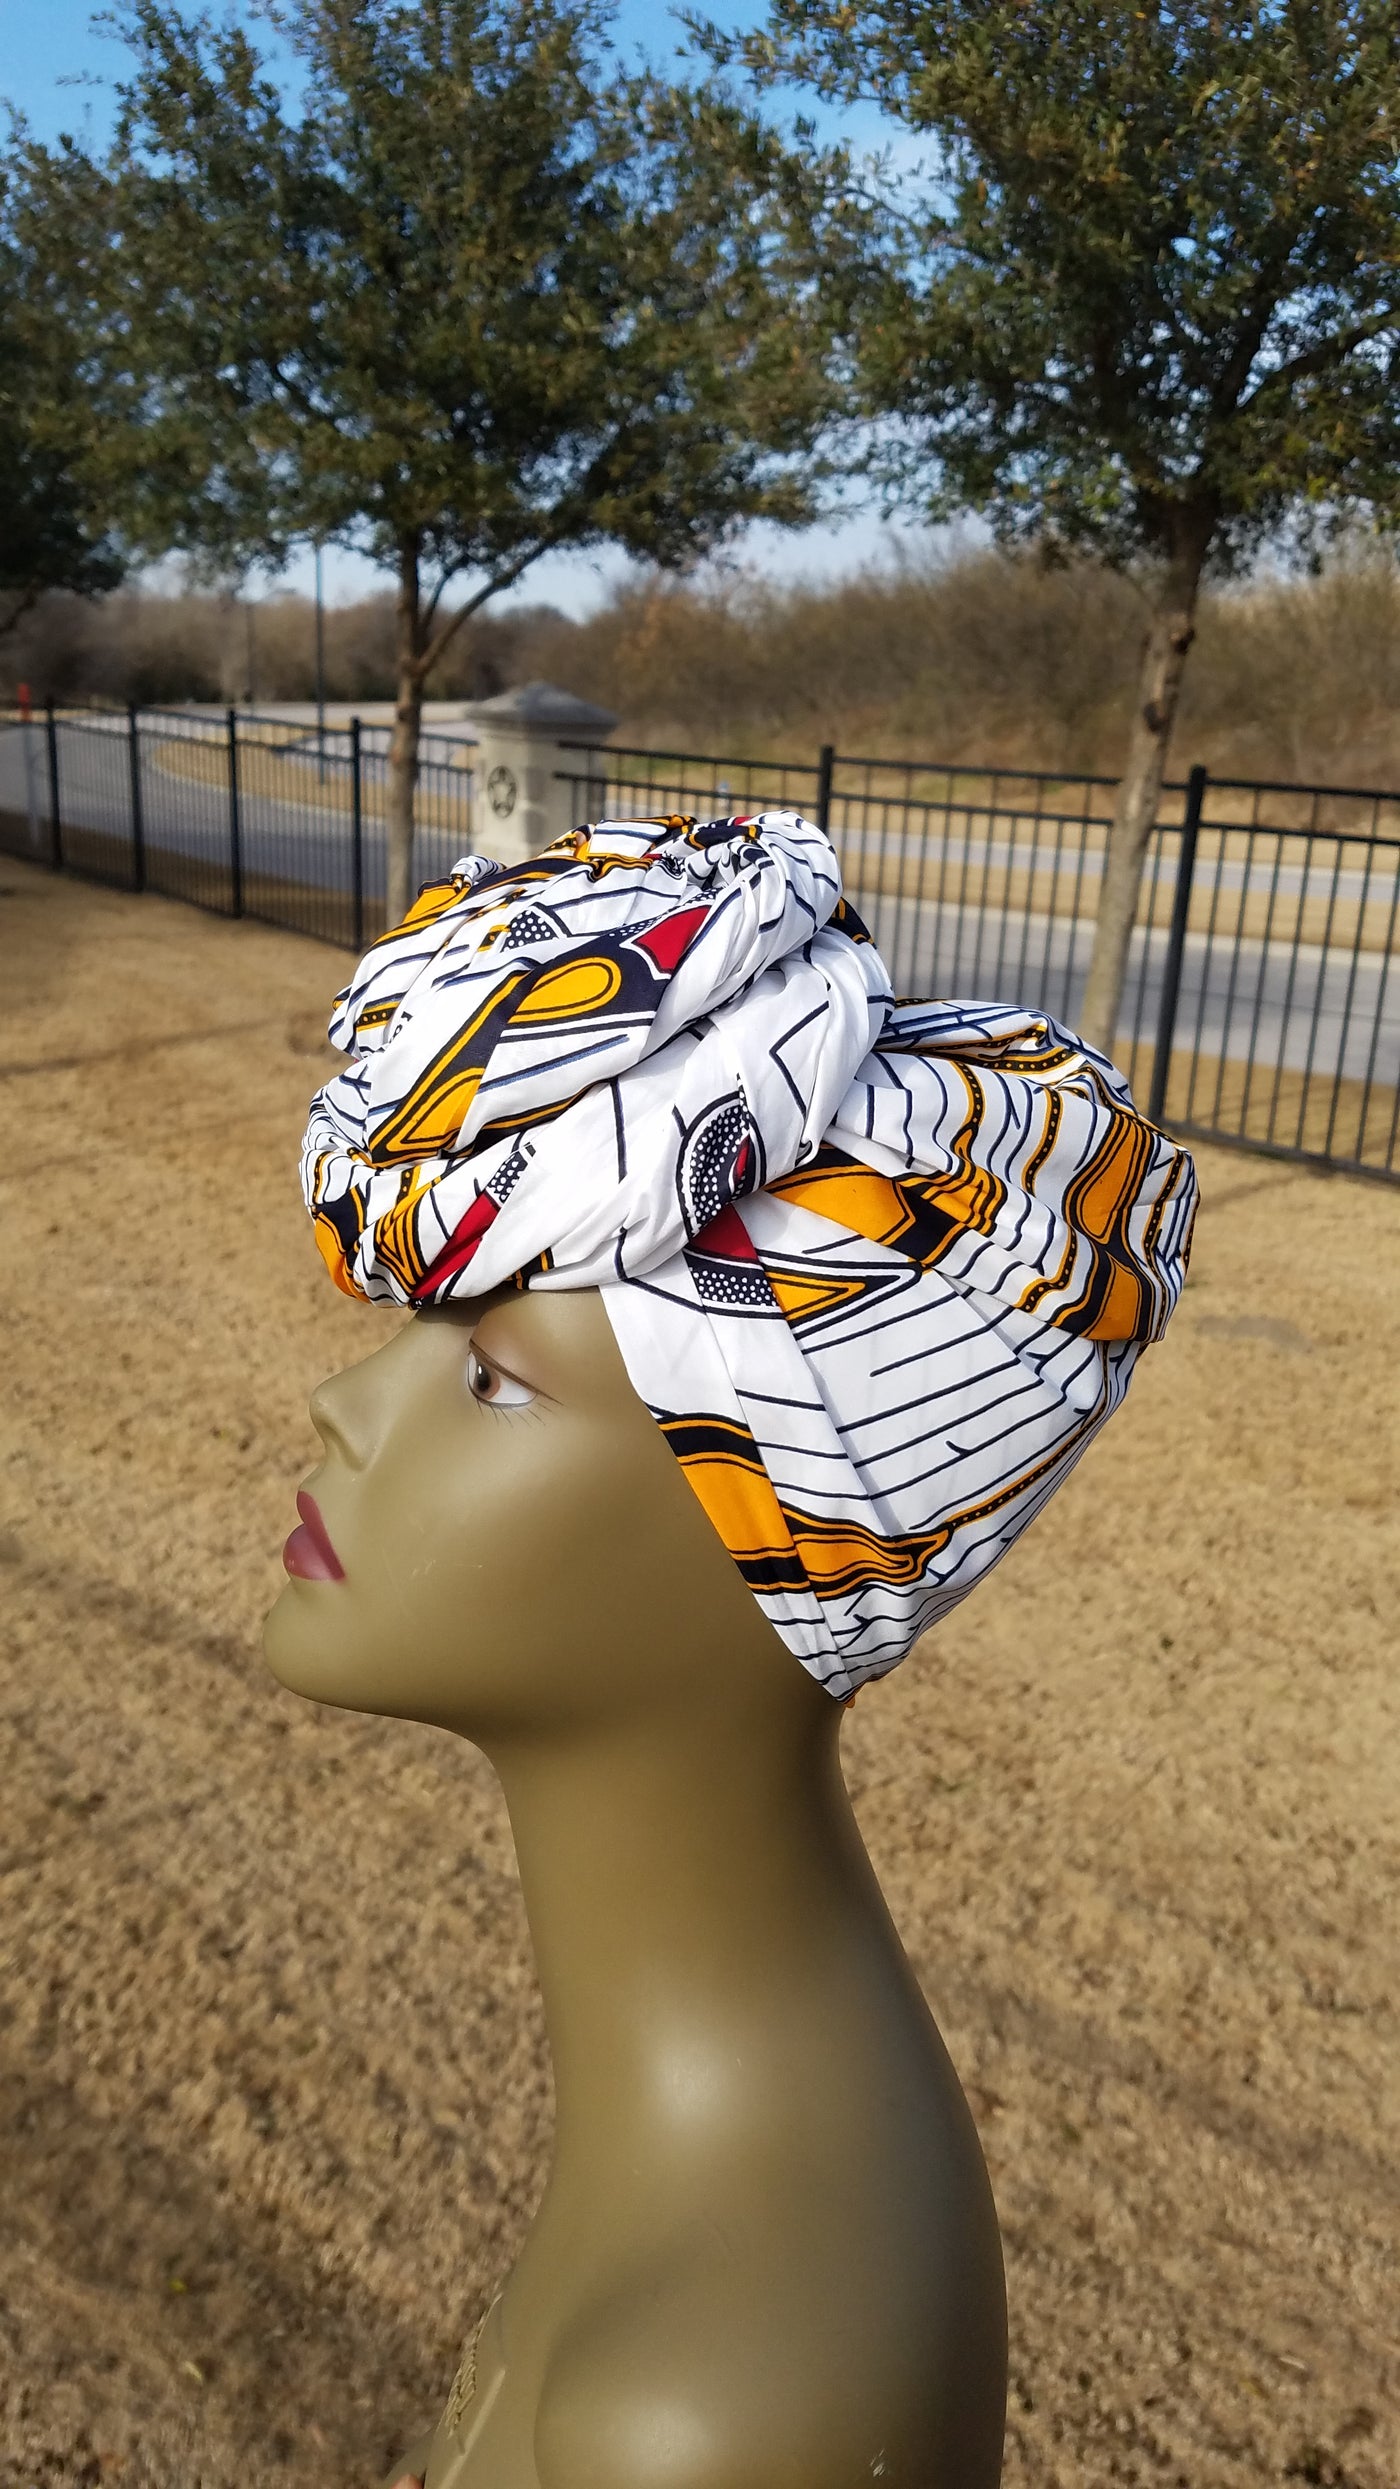 White, Yellow, Red and Black African Fabric Headwrap. Ankara Headwrap